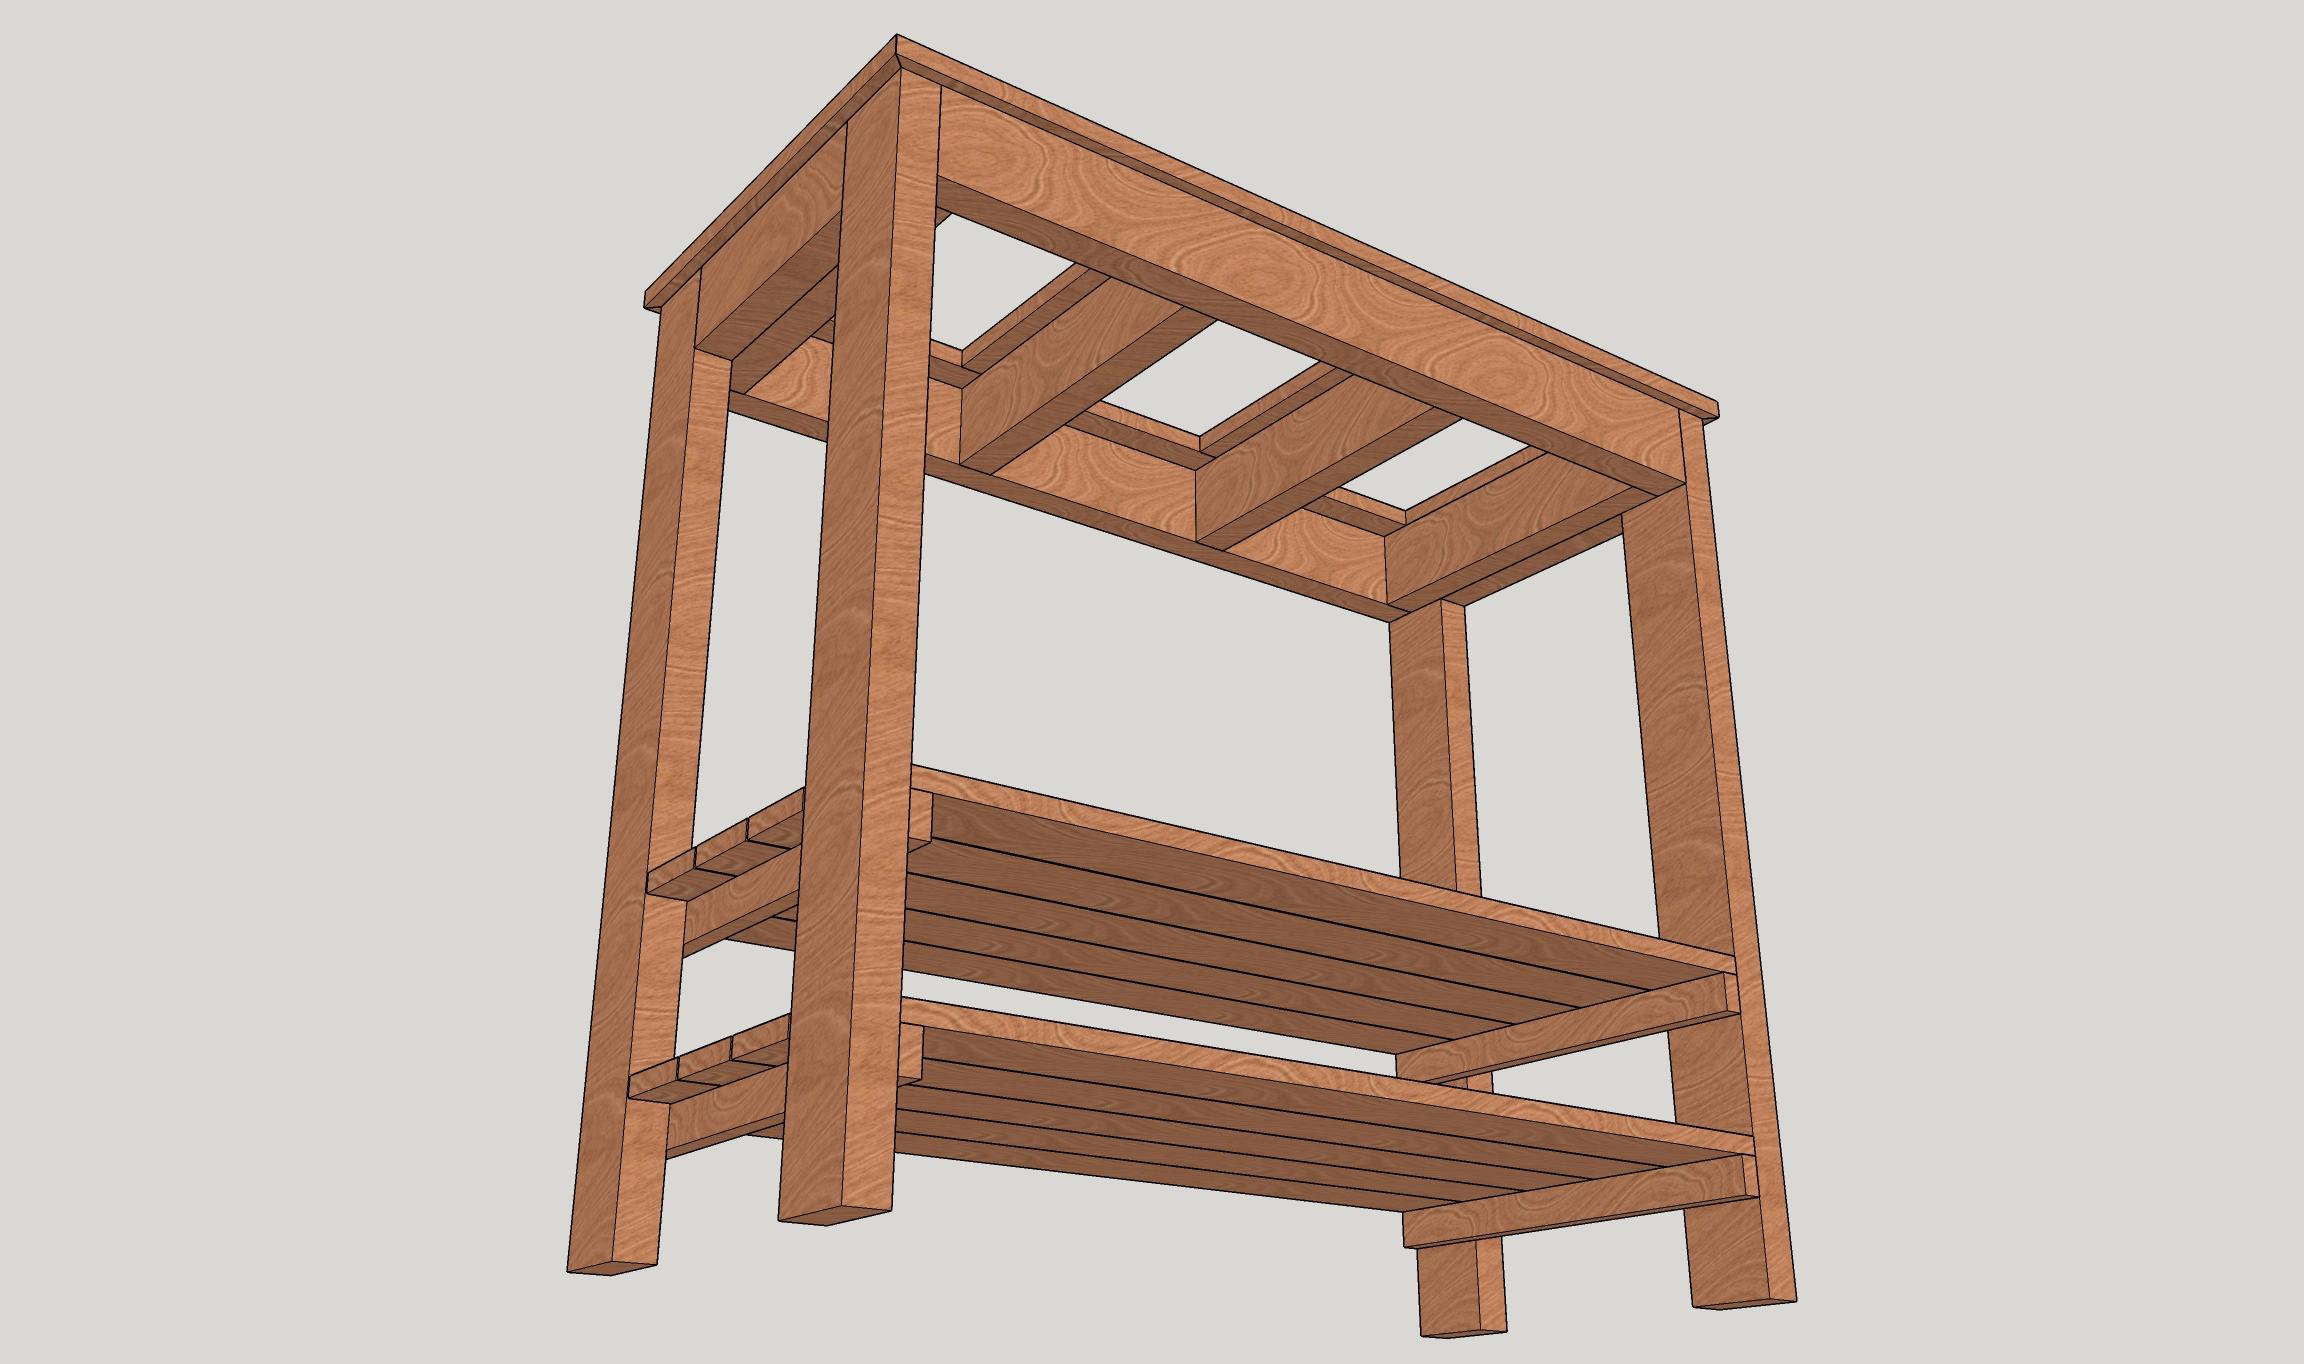 Second draft of aquarium stand with shelves, low view, designed in SketchUp